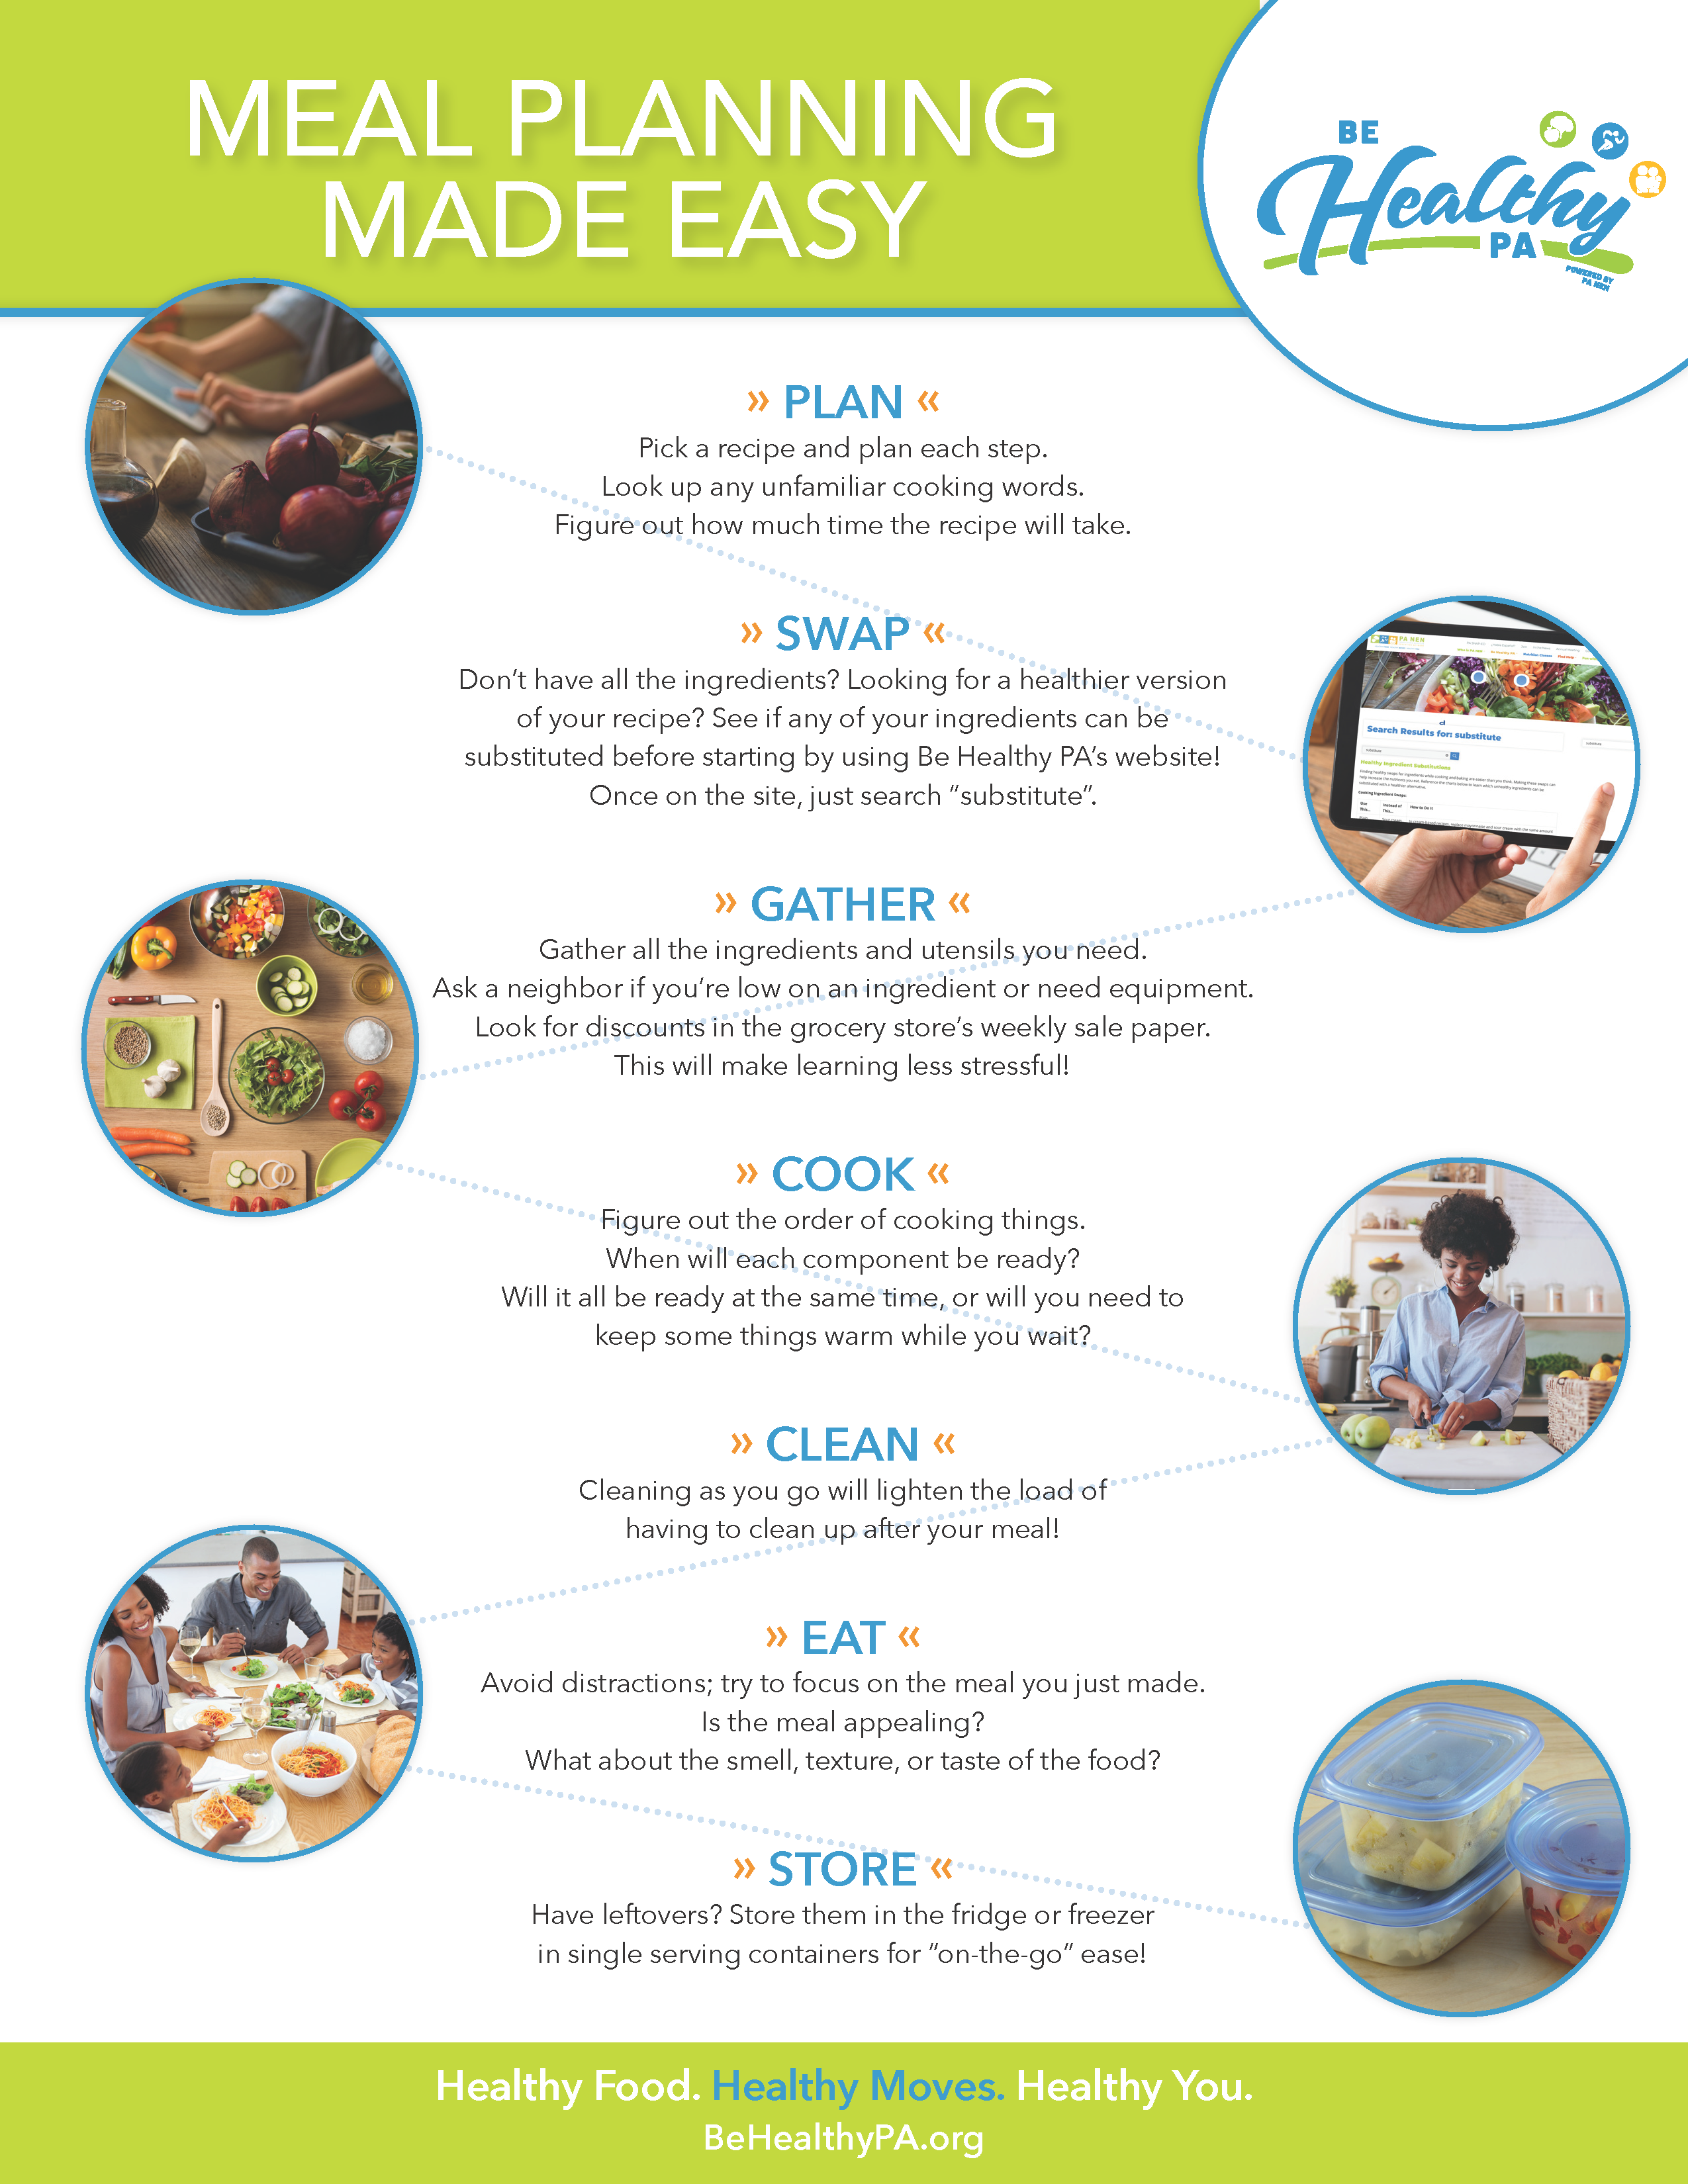 https://www.behealthypa.org/wp-content/uploads/2020/11/Meal-Planning-Infographic.png